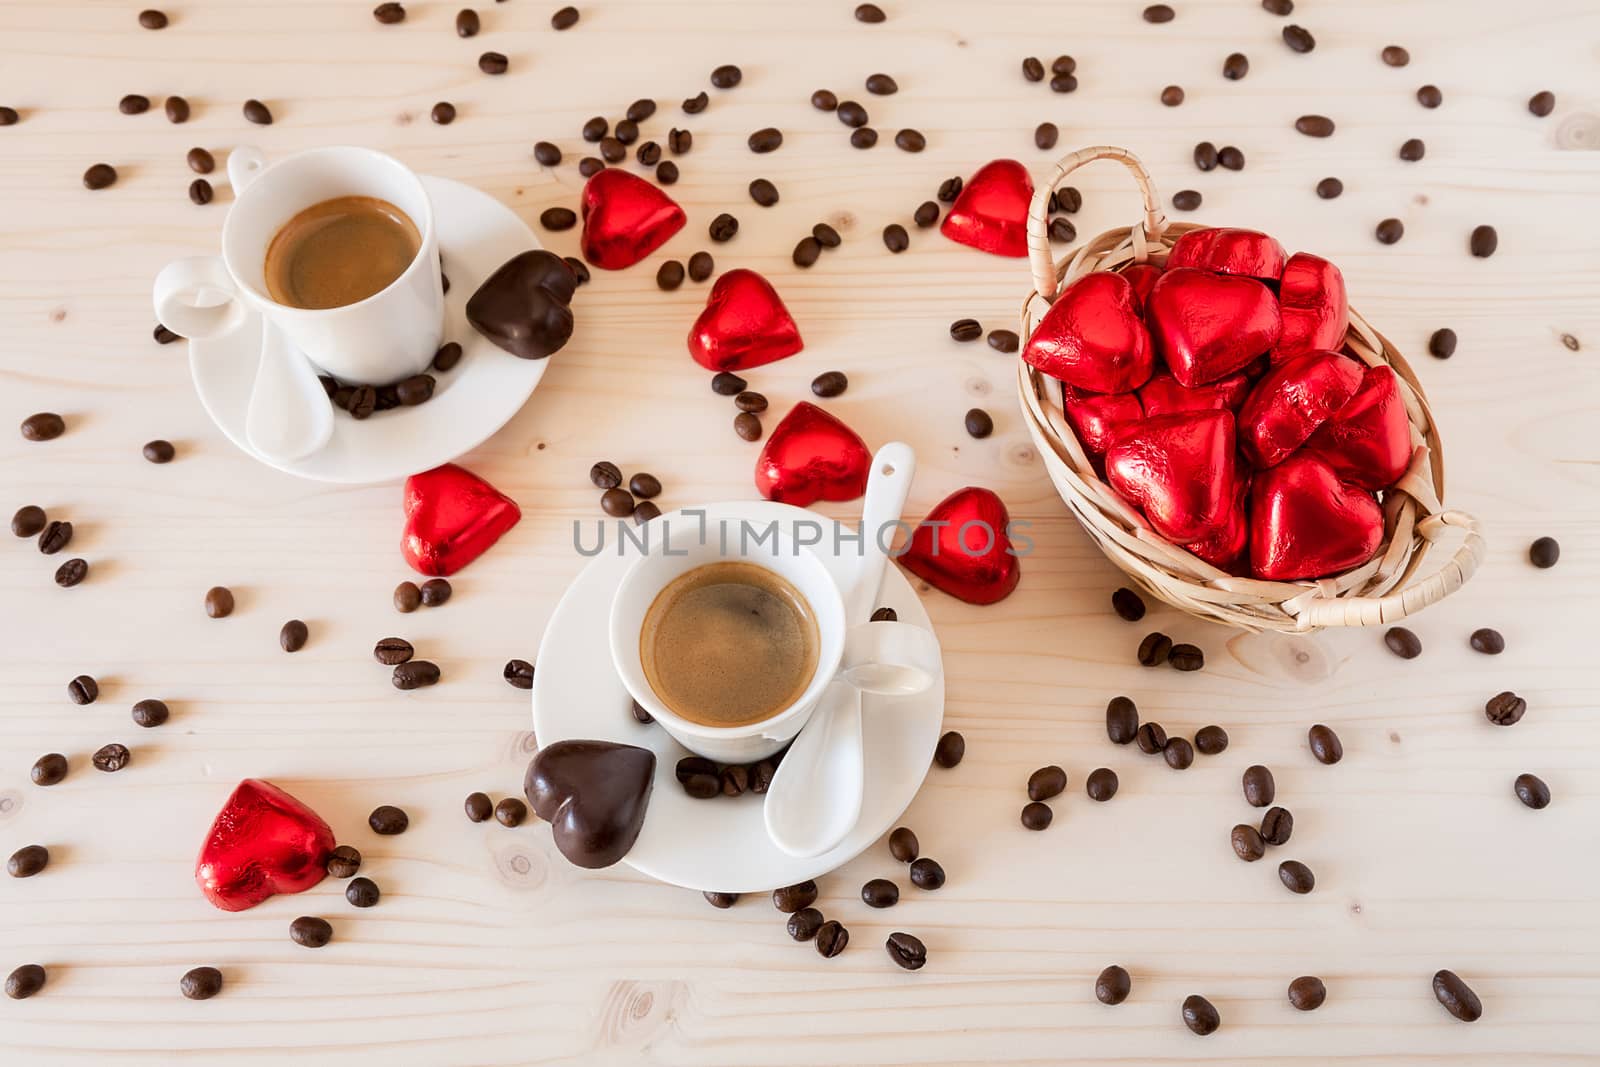 Red chocolate hearts in a small basket and two cups of coffee with coffee beans viewed from above